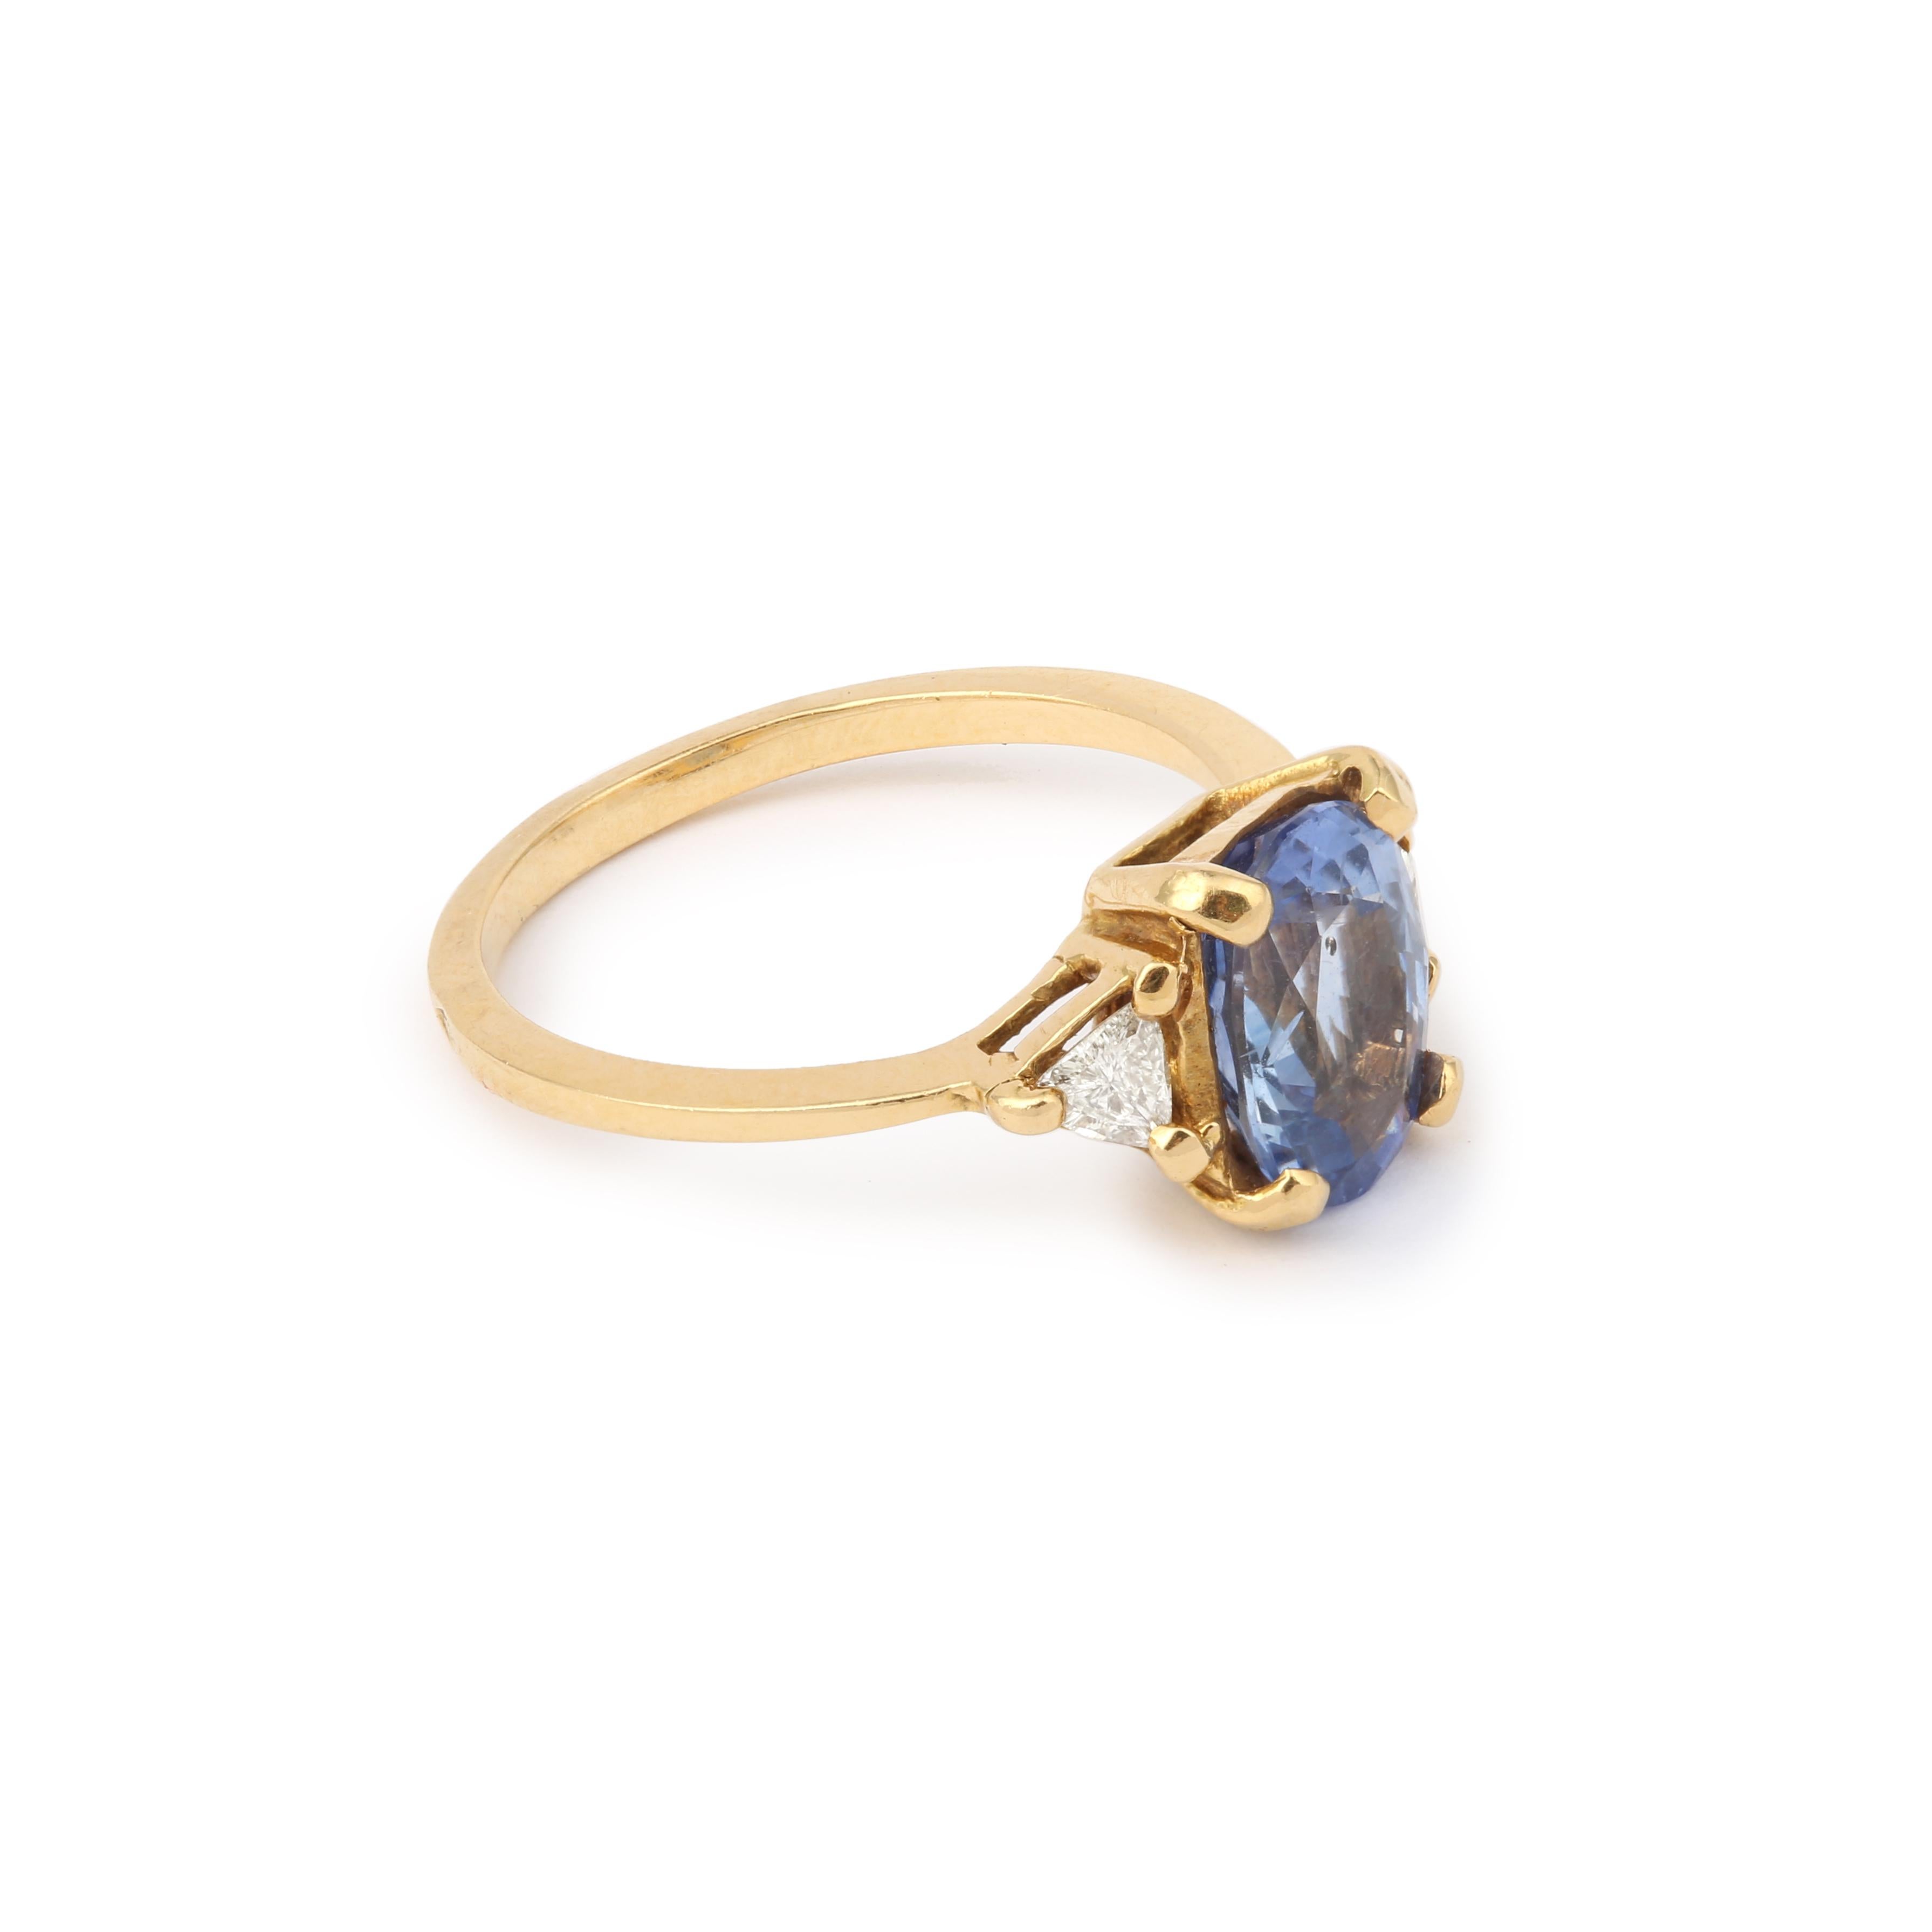 Yellow gold ring centred by an oval-cut sapphire set with two troïdias diamonds.

Estimated weight of the sapphire : 3.20 carats

Total estimated weight of diamonds: 0.30 carats

Dimensions : 10.29 x 15.83 x 6.01 mm (0.405 x 0.623 x 0.236